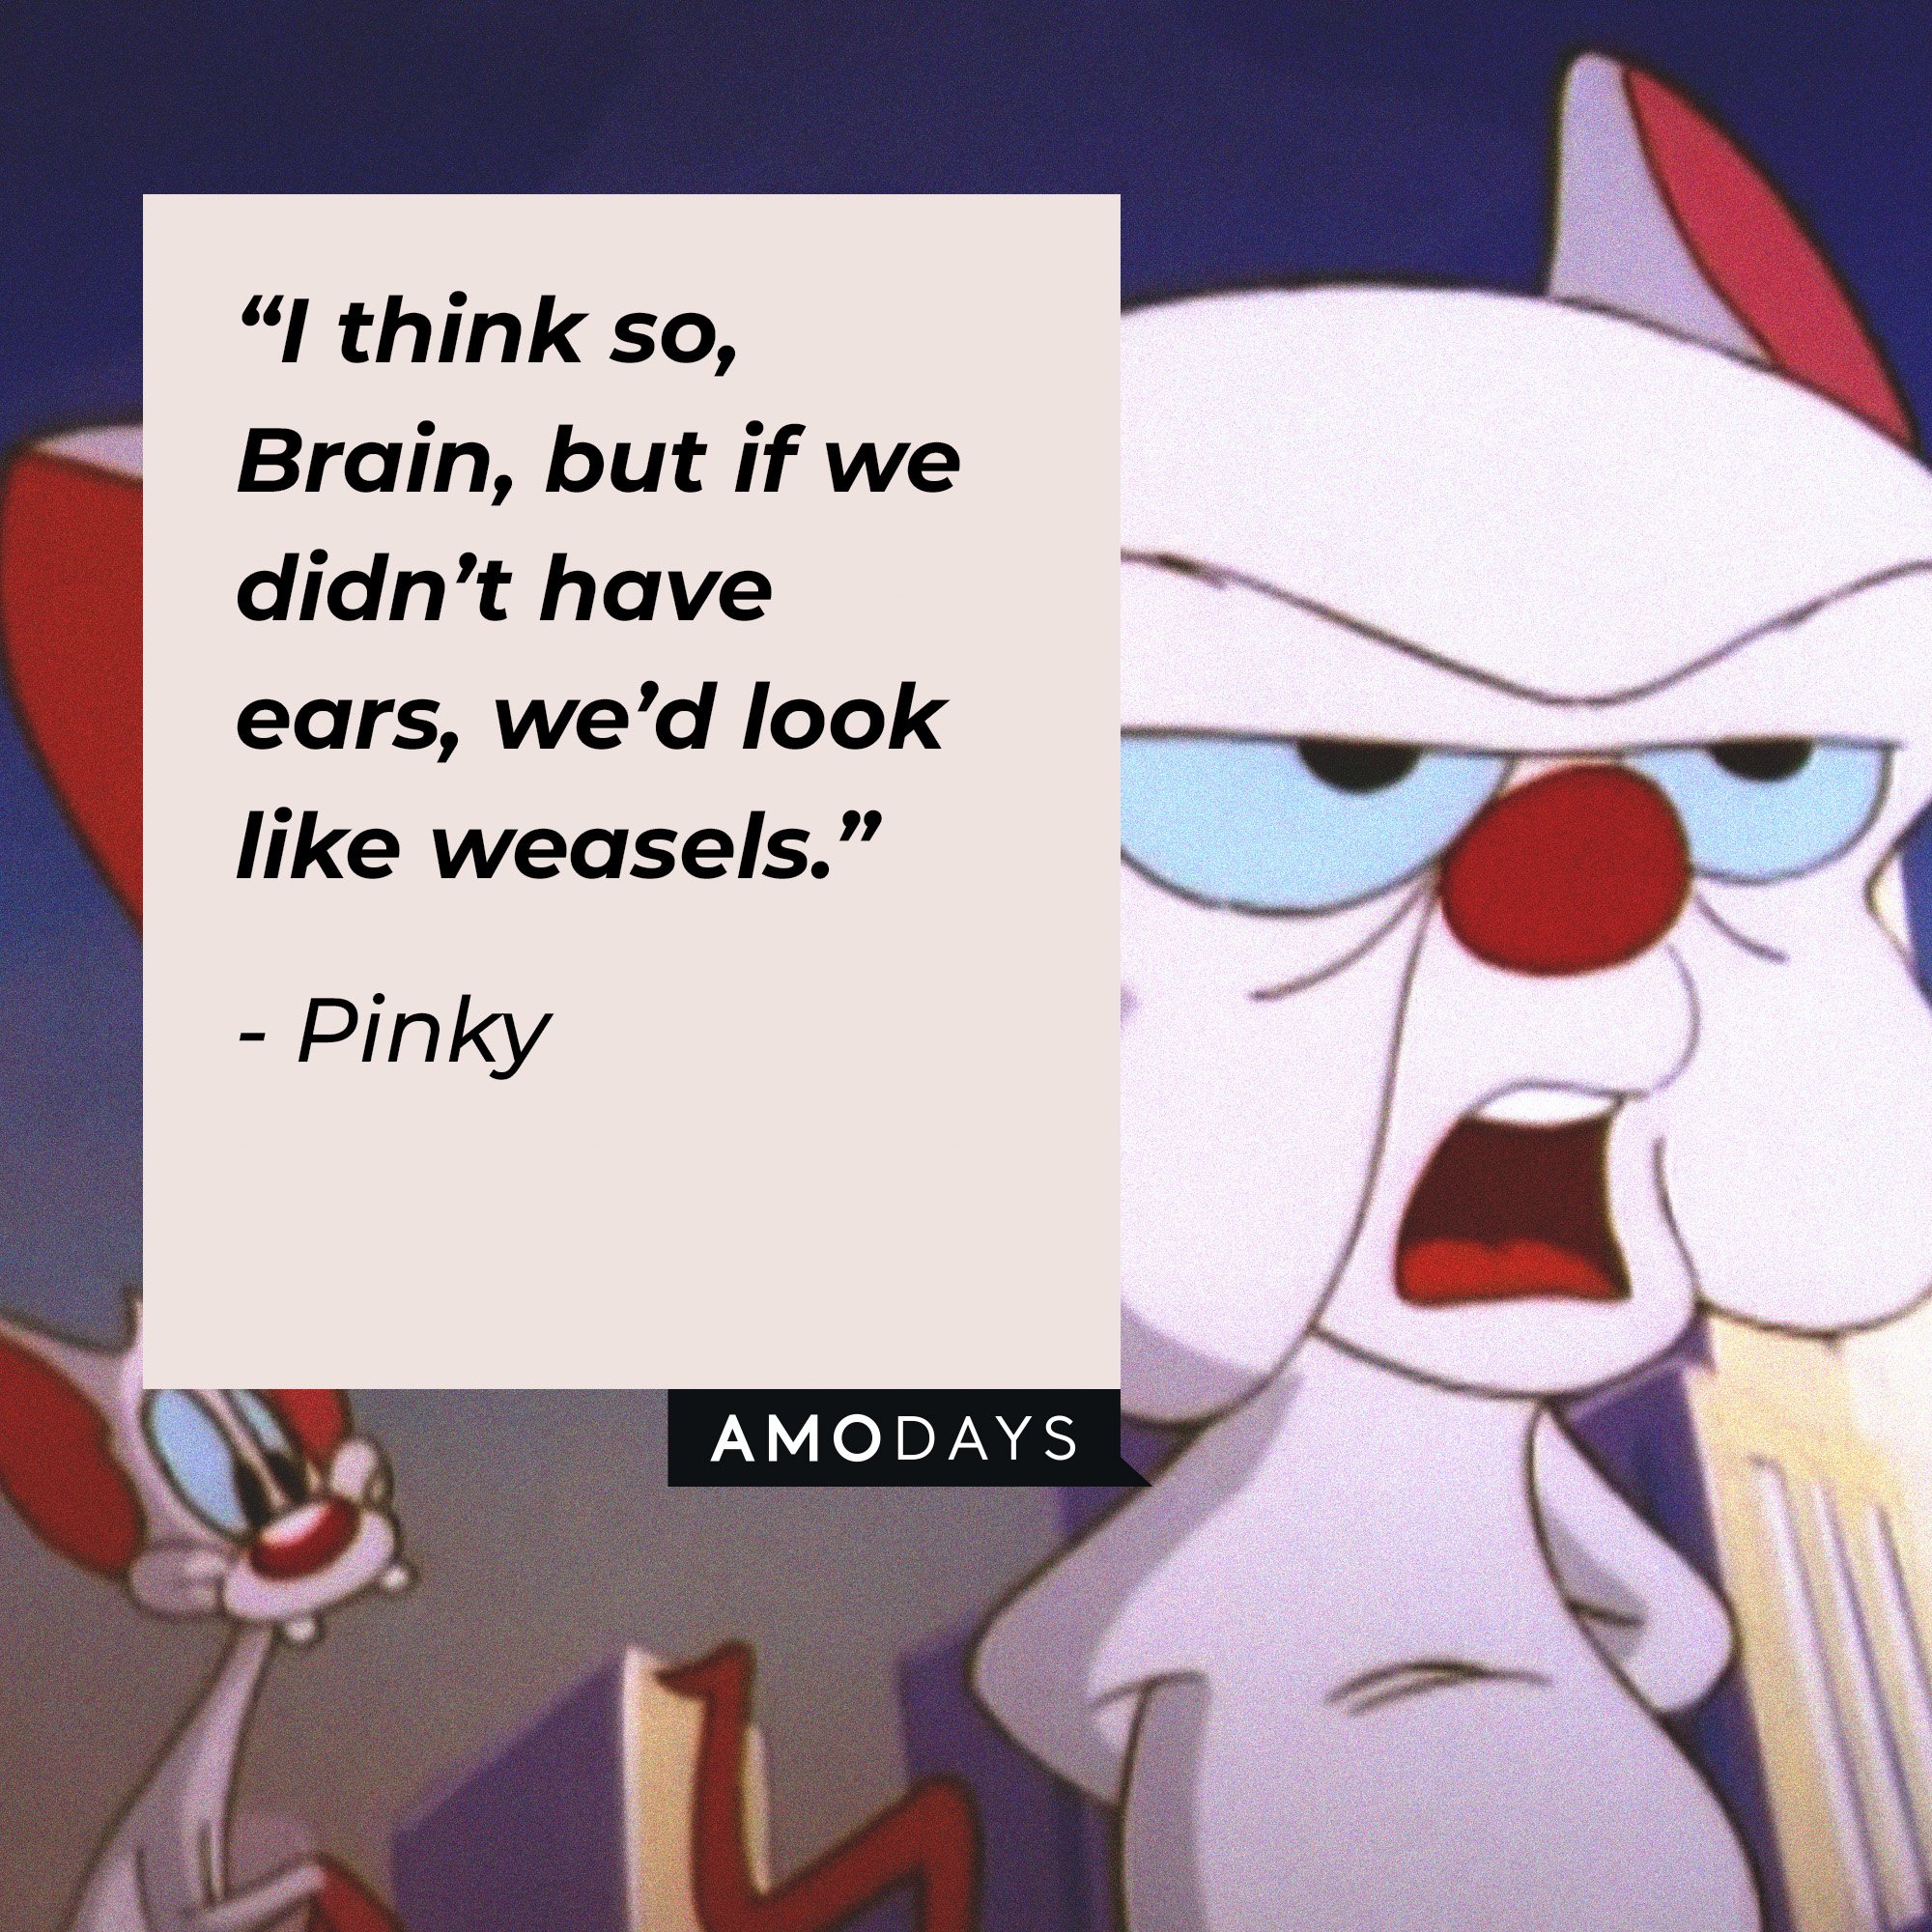 Pinky's quote: “I think so, Brain, but if we didn’t have ears, we’d look like weasels.” | Image: AmoDays